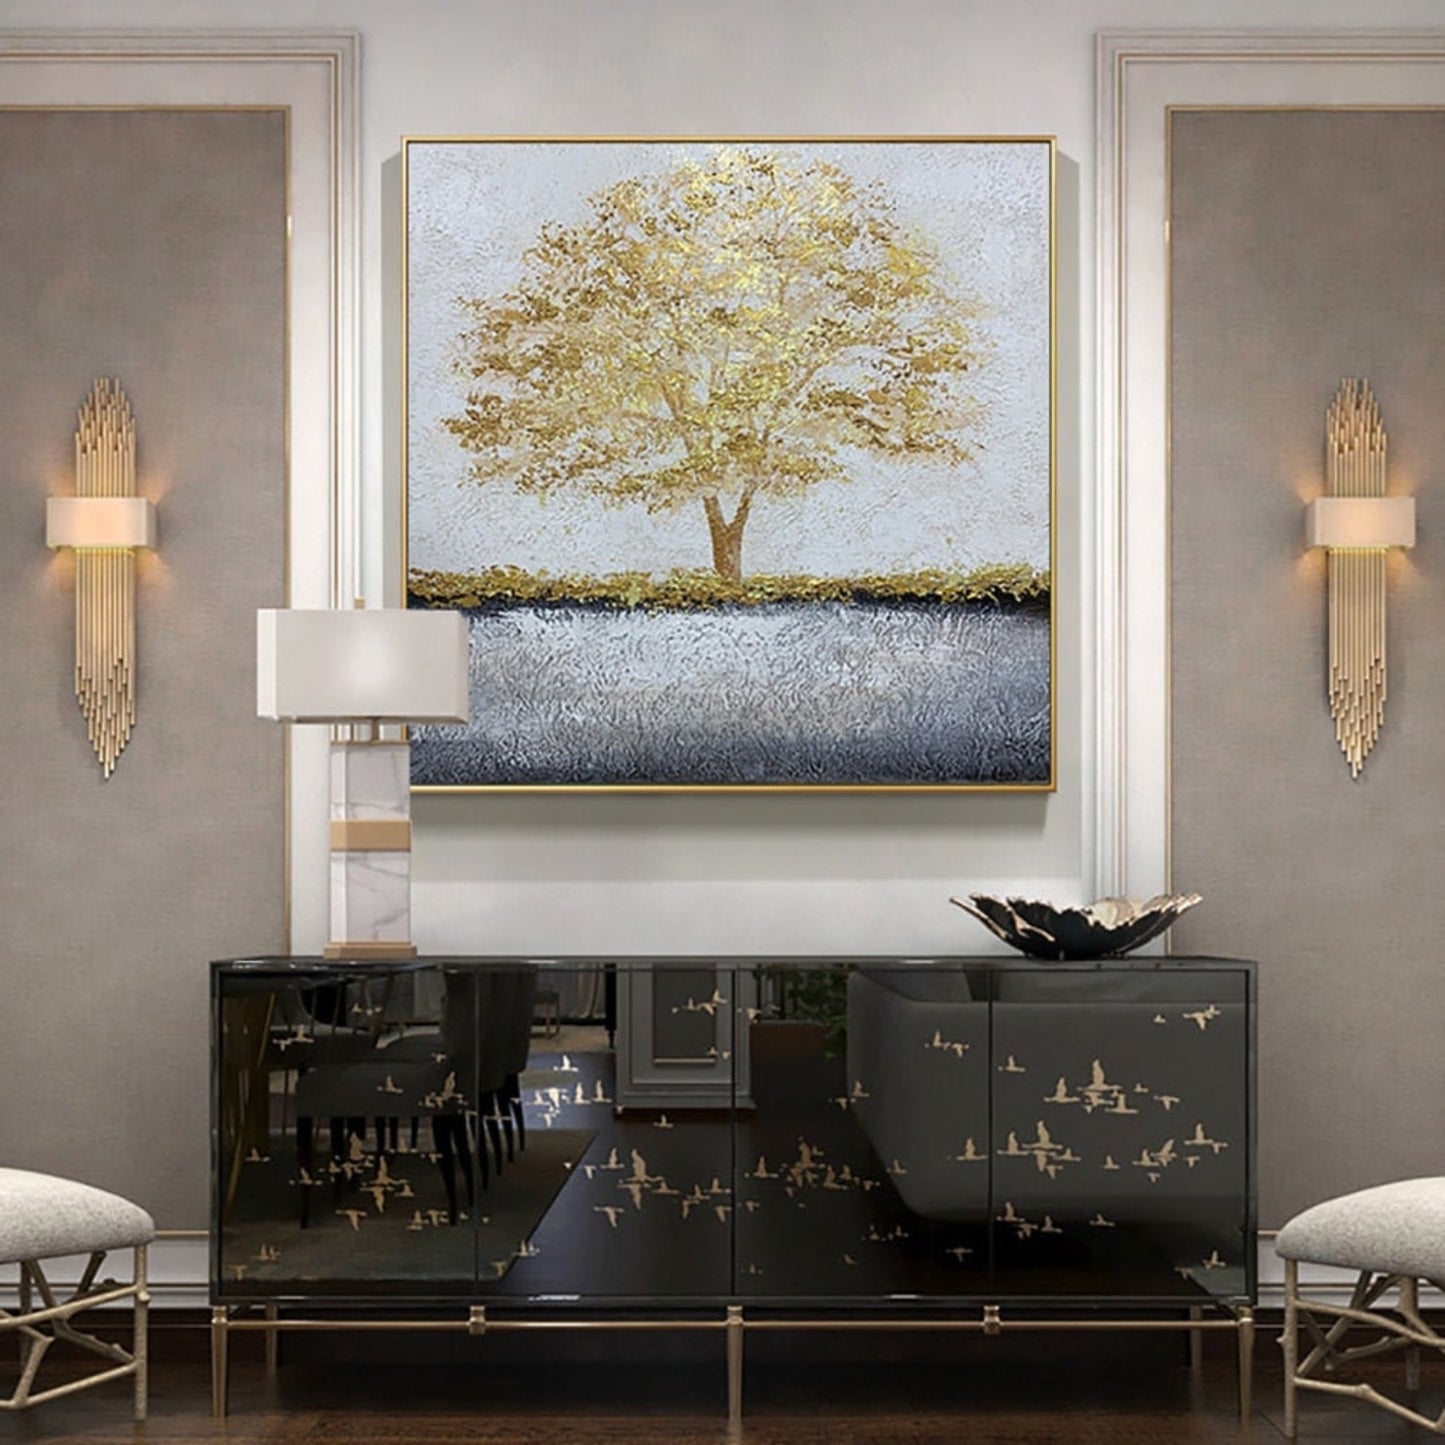 Textured Golden Tree Abstract Landscape Painting